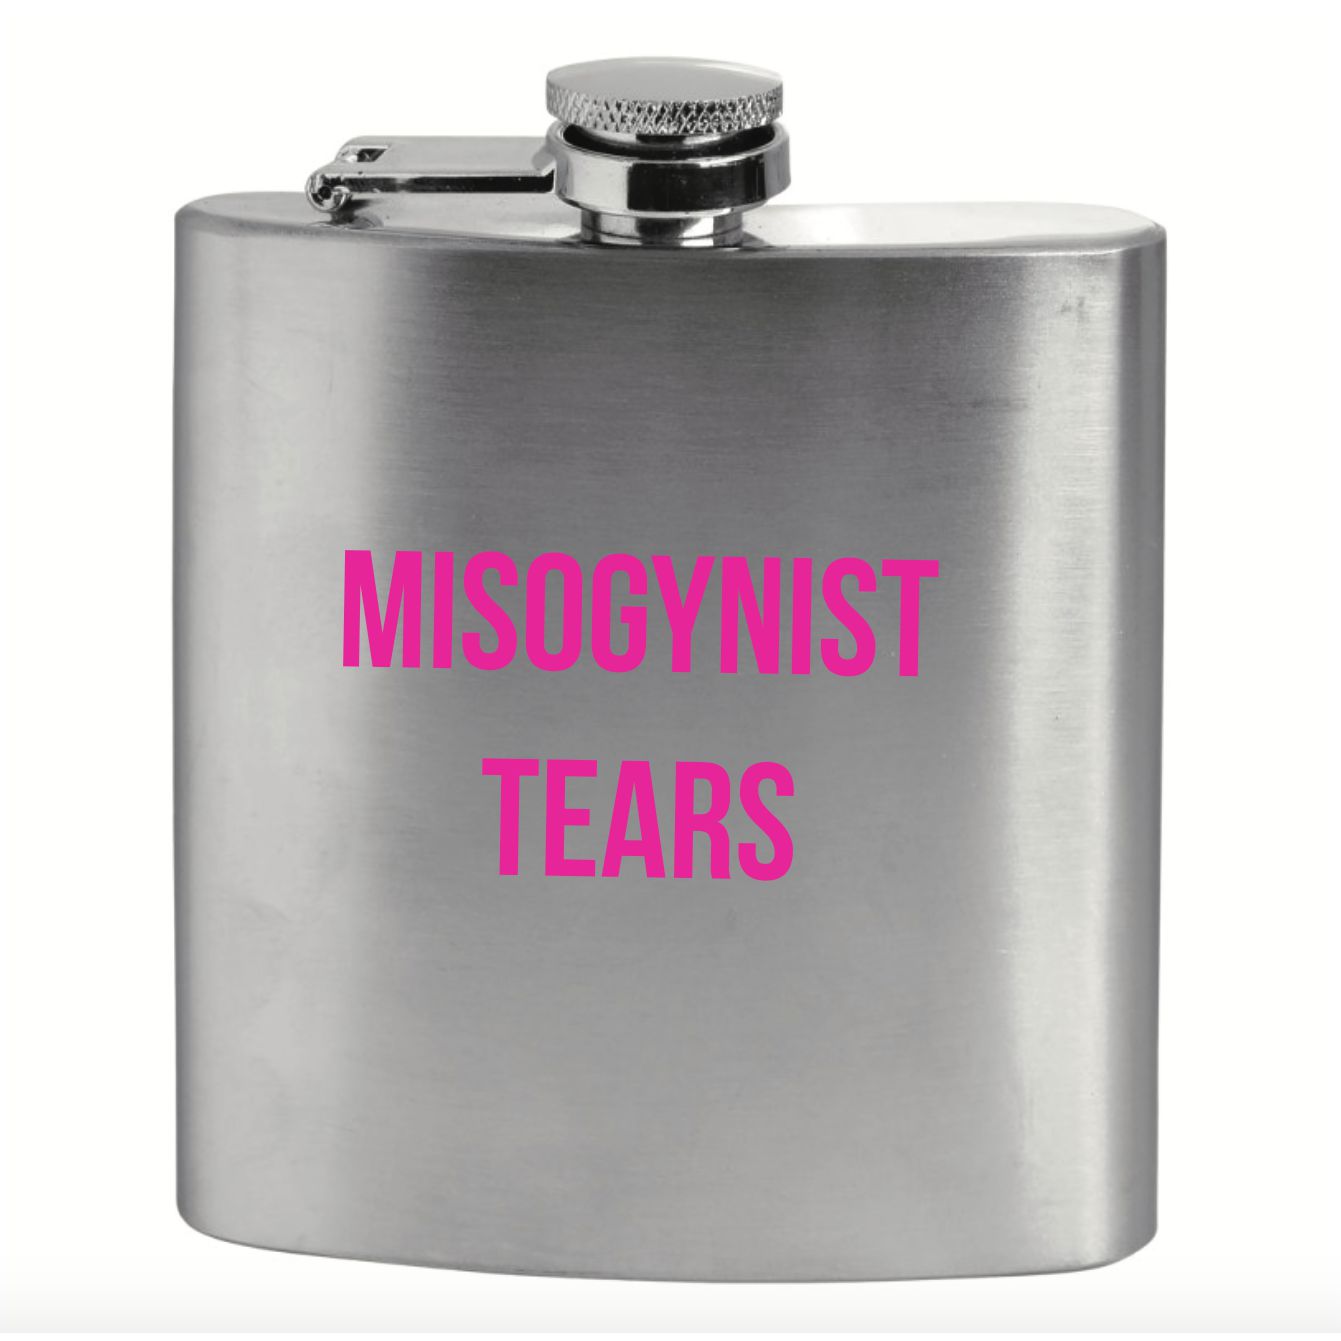 Misogynist Tears Flask in Silver with Pink Lettering